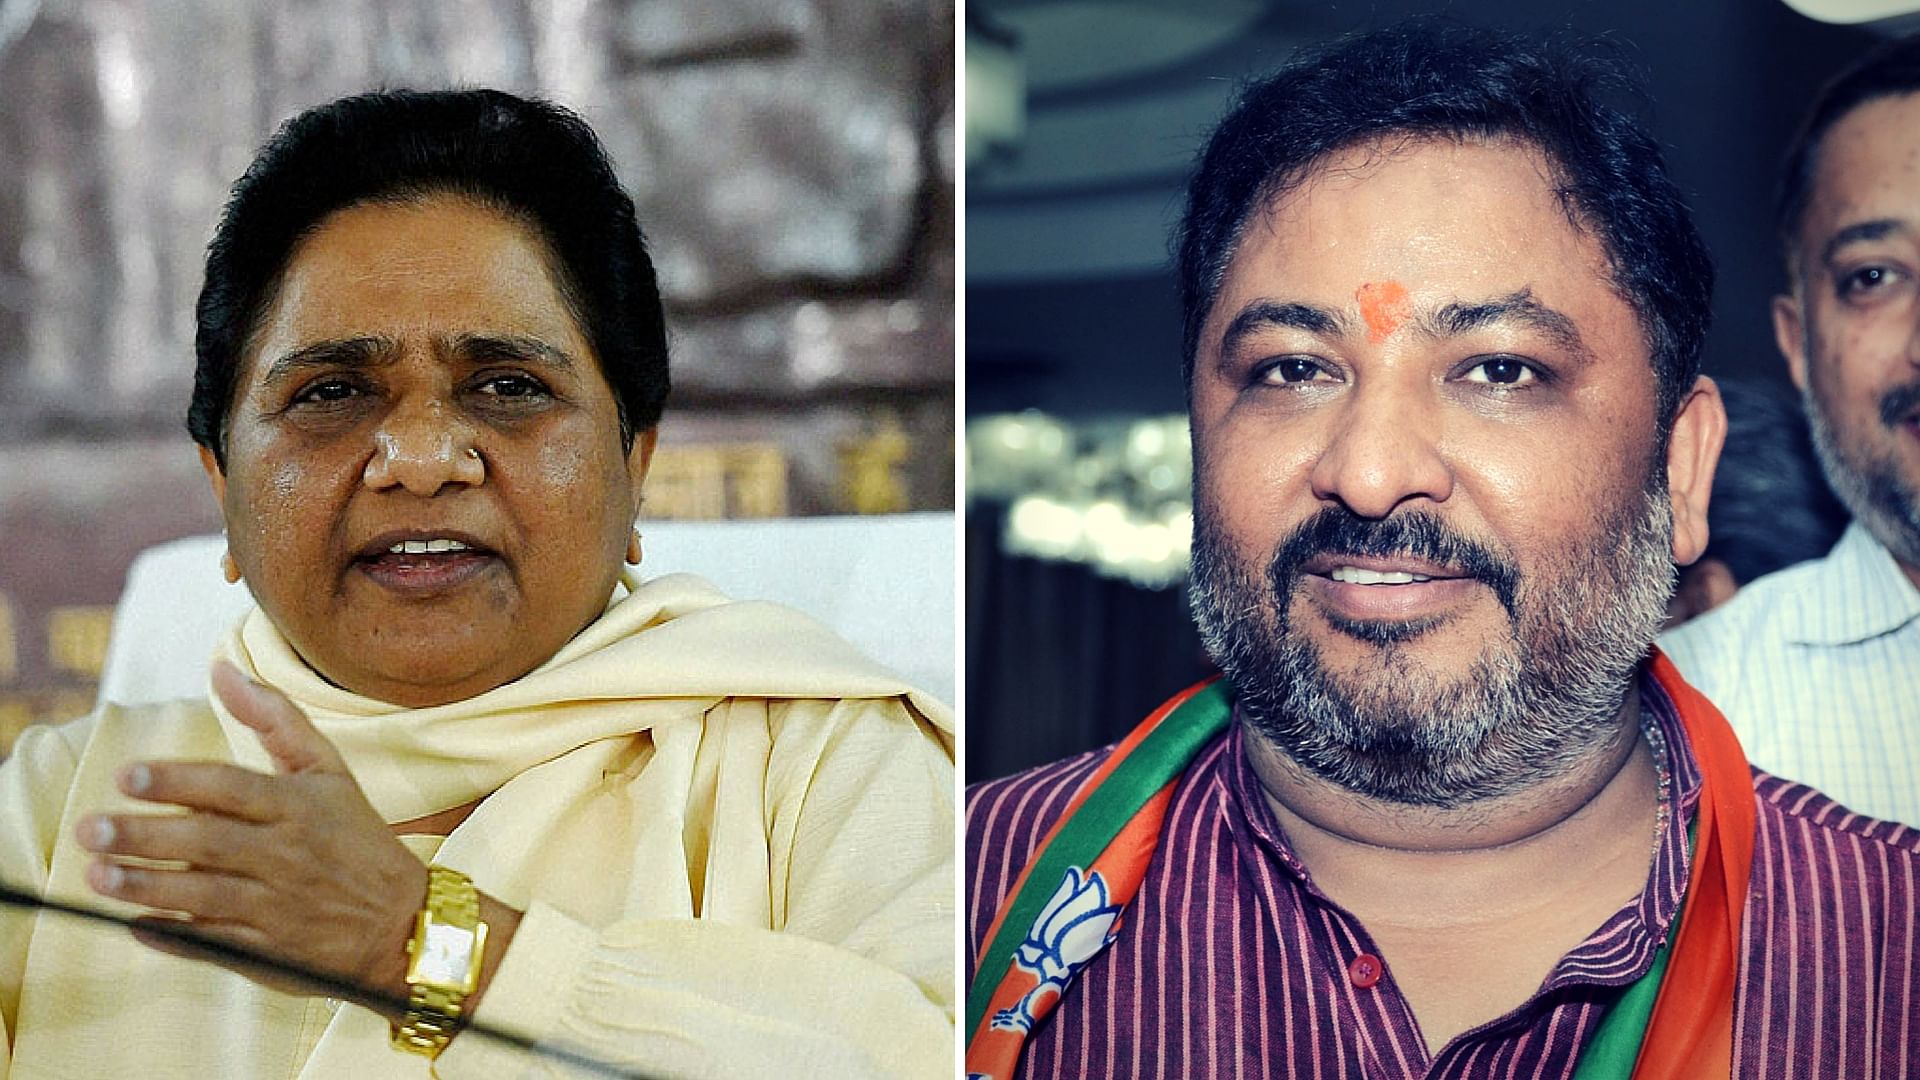 BJP supremo Mayawati (L) and former BJP Vice President in UP, Dayashankar Singh. (Photo: PTI, IANS/Altered by <b>The Quint</b>)